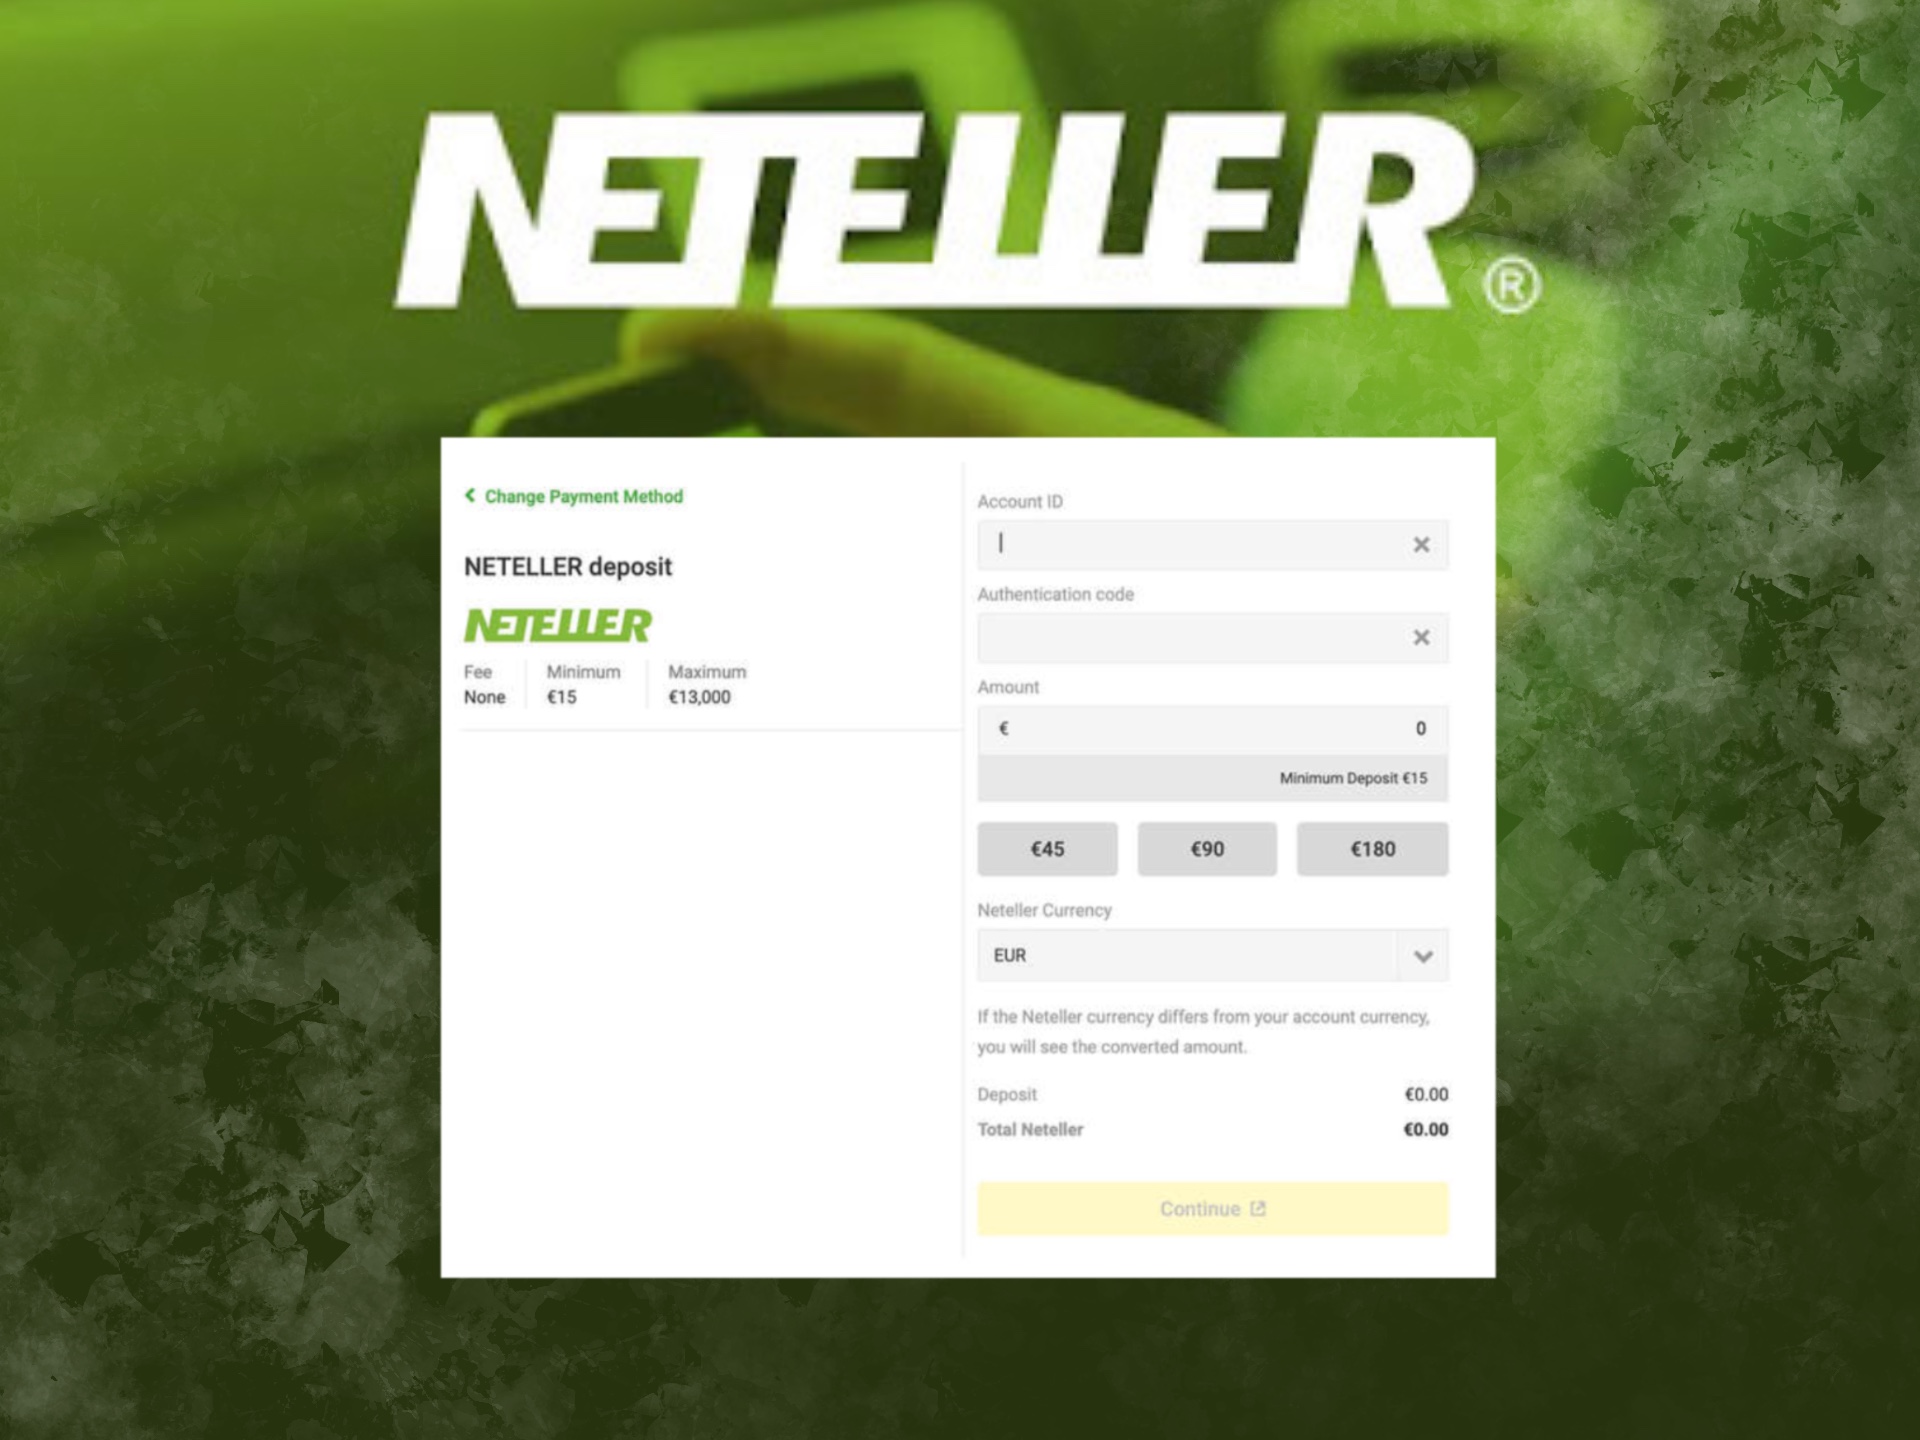 Neteller is another great opportunity for instant deposits at online casinos in India.